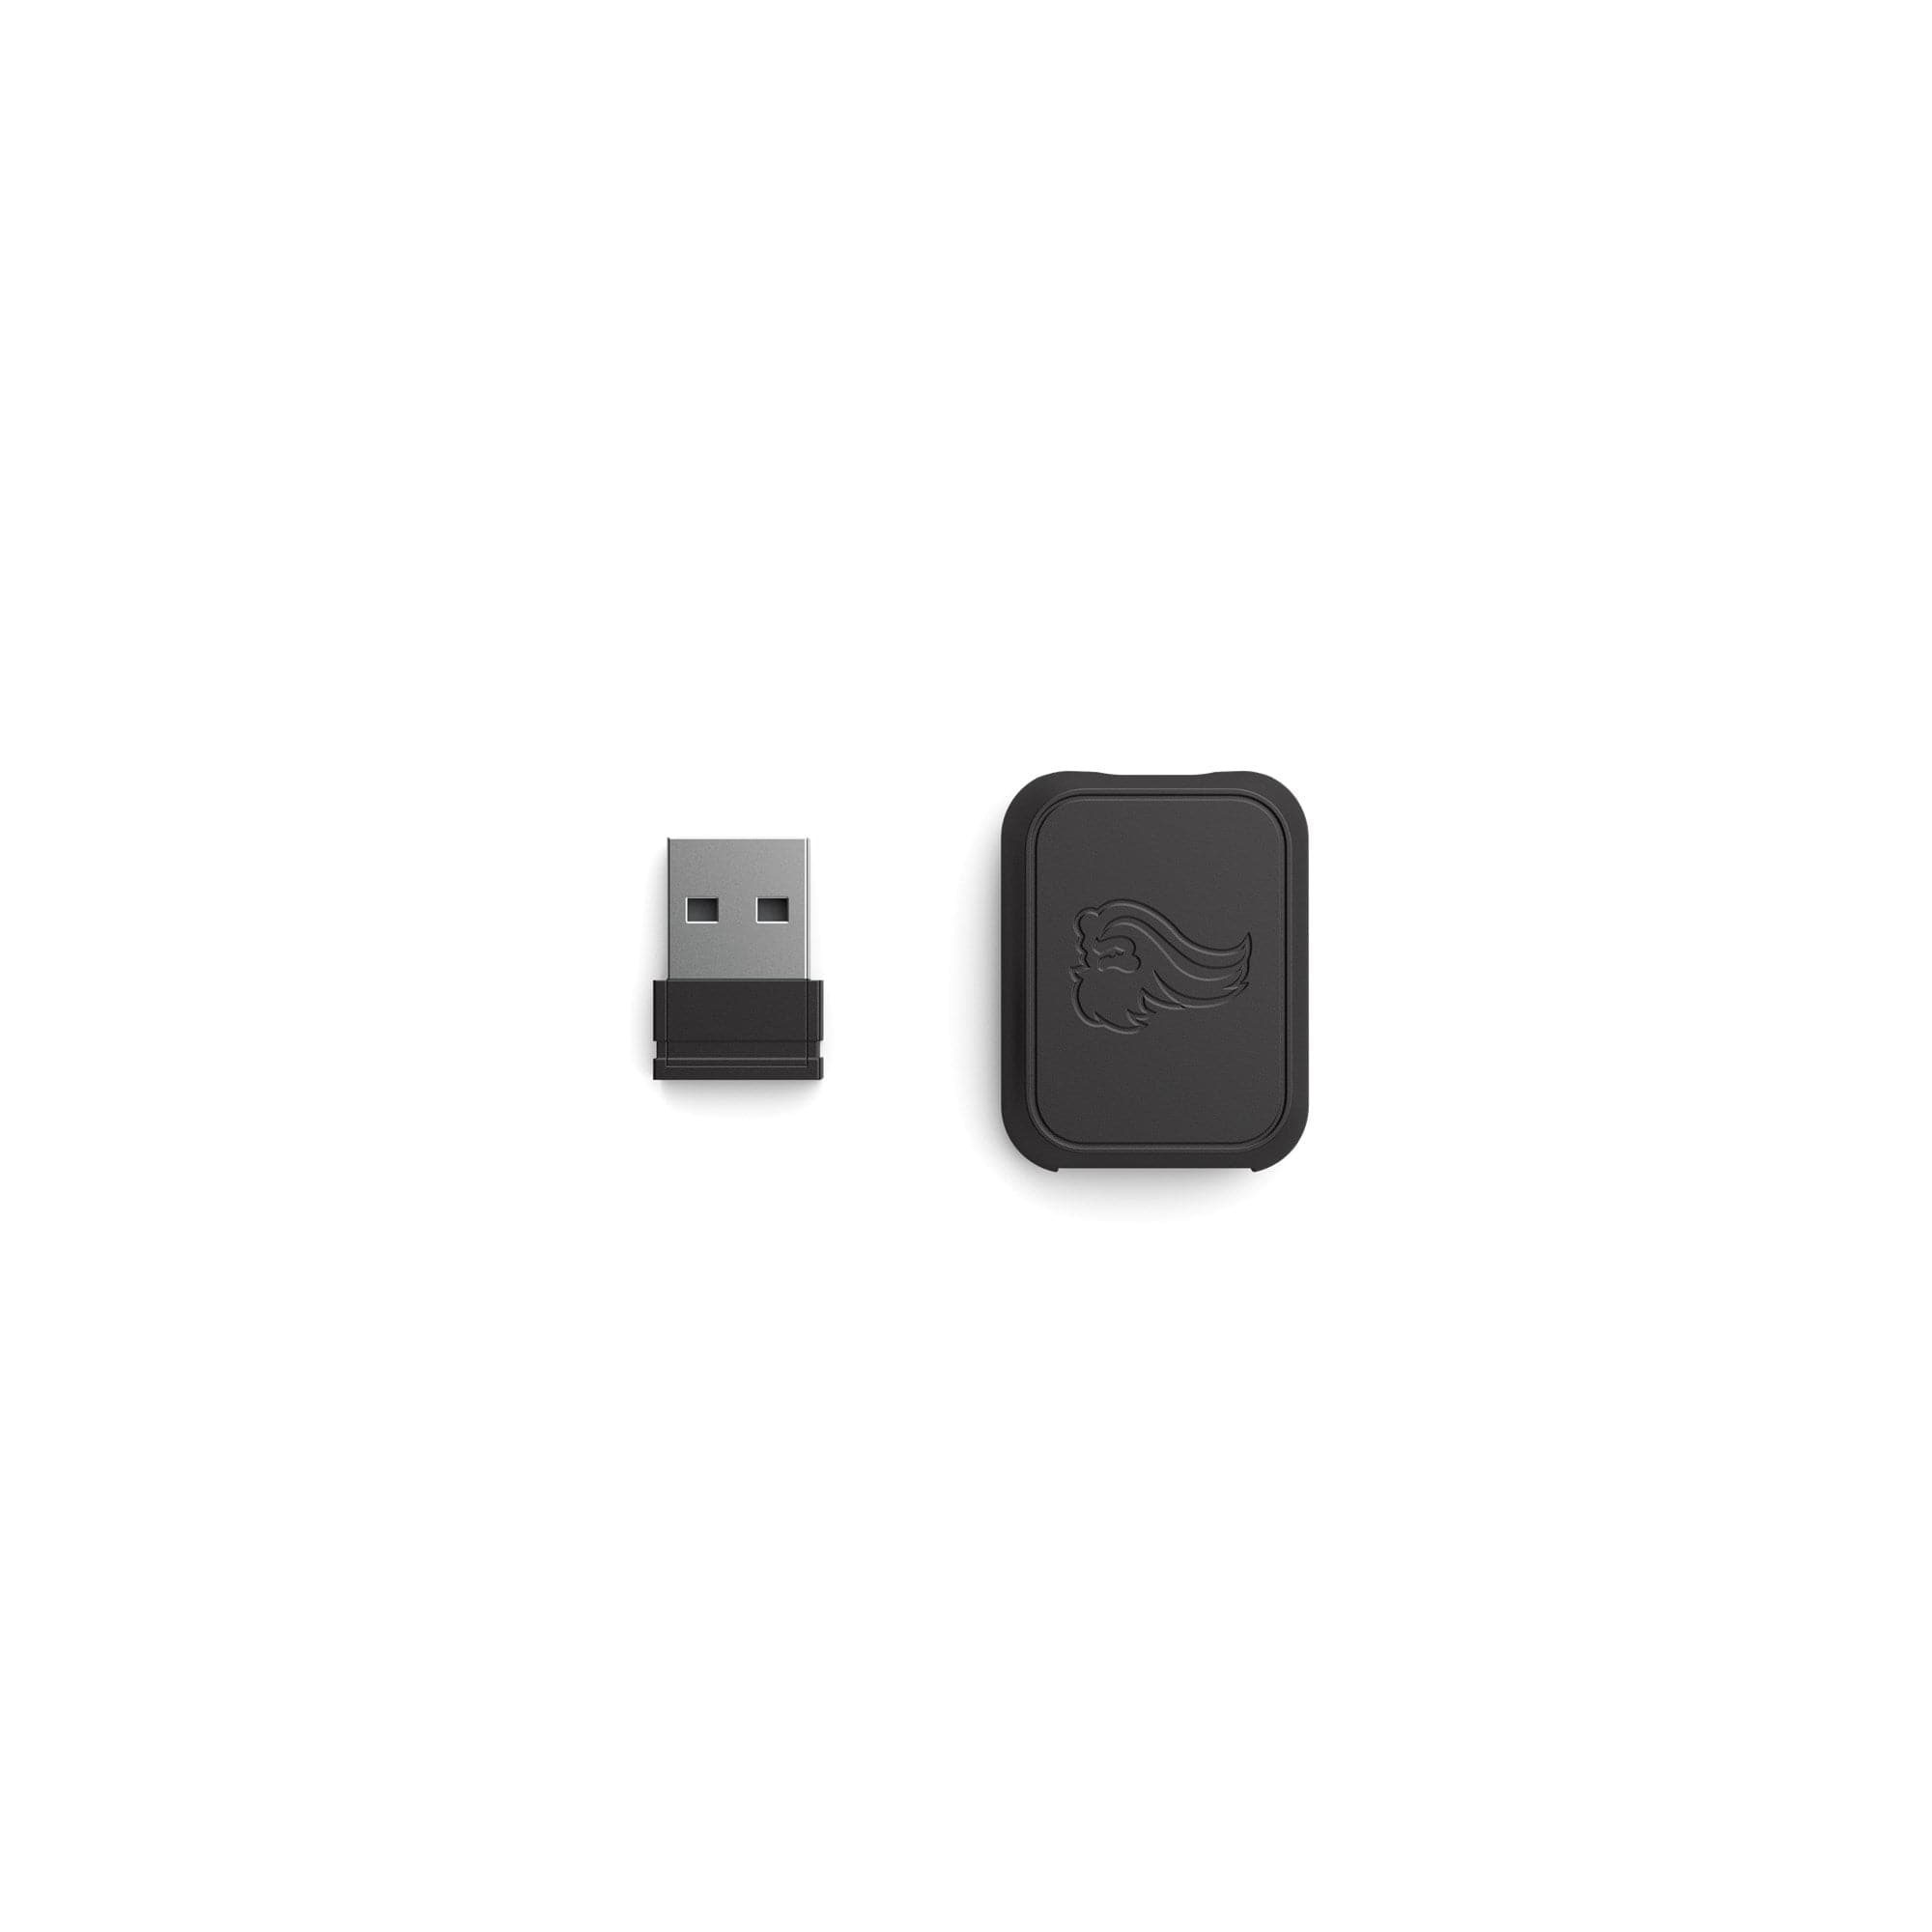 Dongle thay thế Glorious Wireless Dongle Kit